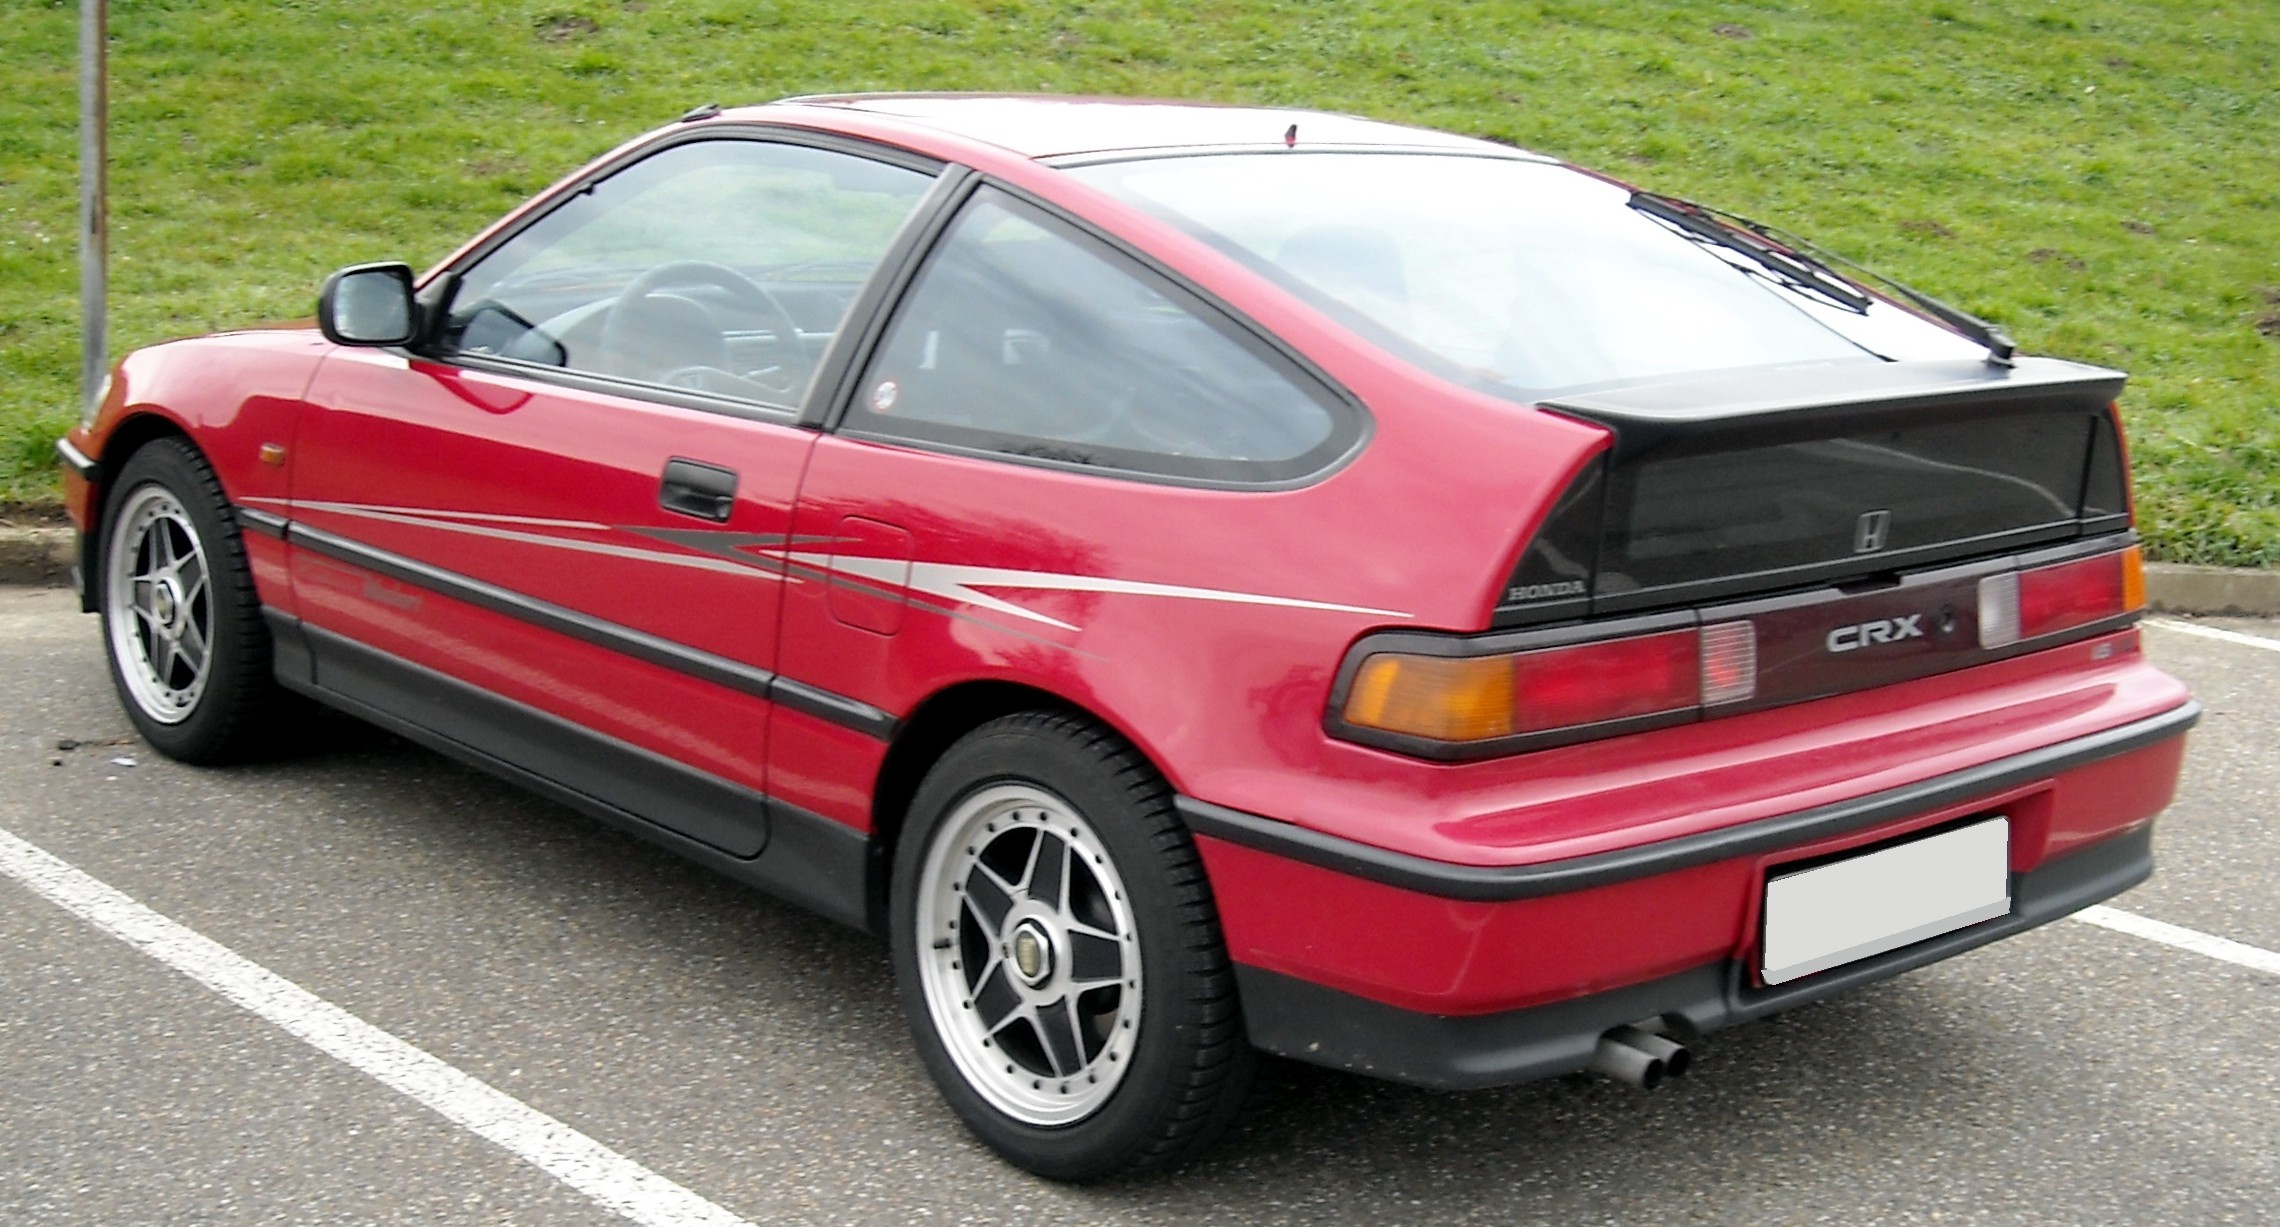 Honda CRX, Iconic car, Specifications and information, Auto database, 2280x1230 HD Desktop